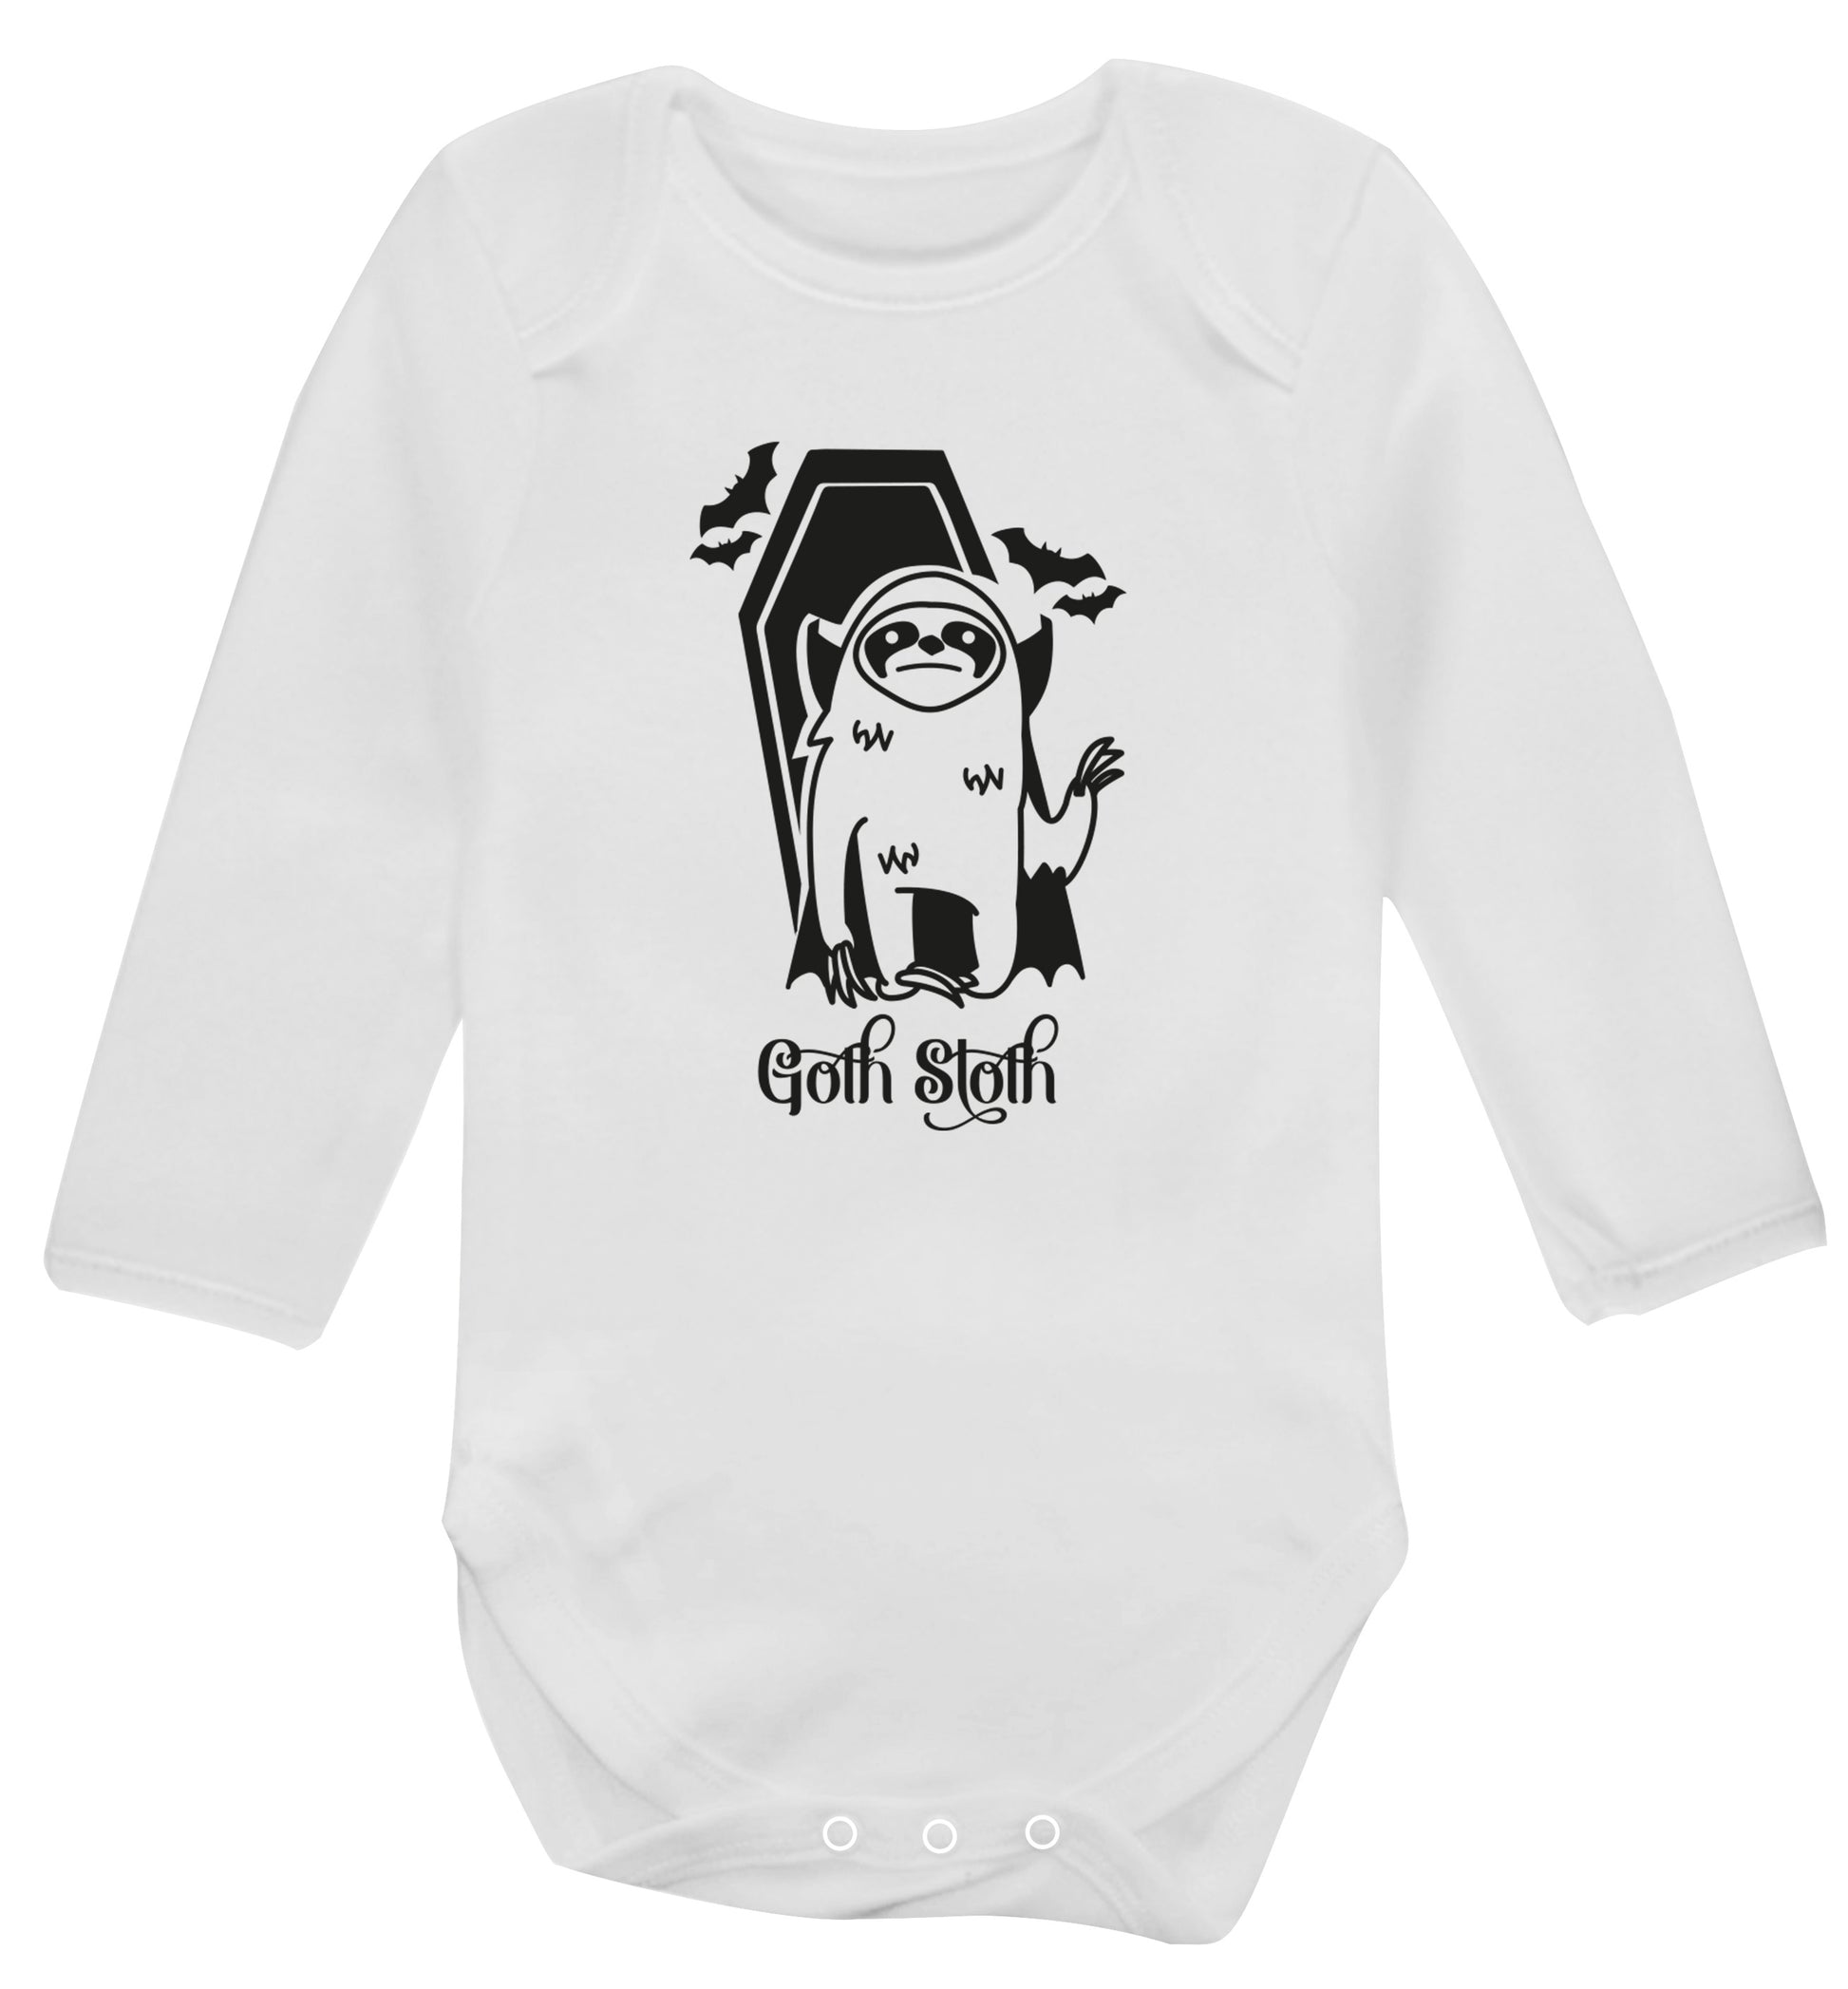 Goth Sloth Baby Vest long sleeved white 6-12 months